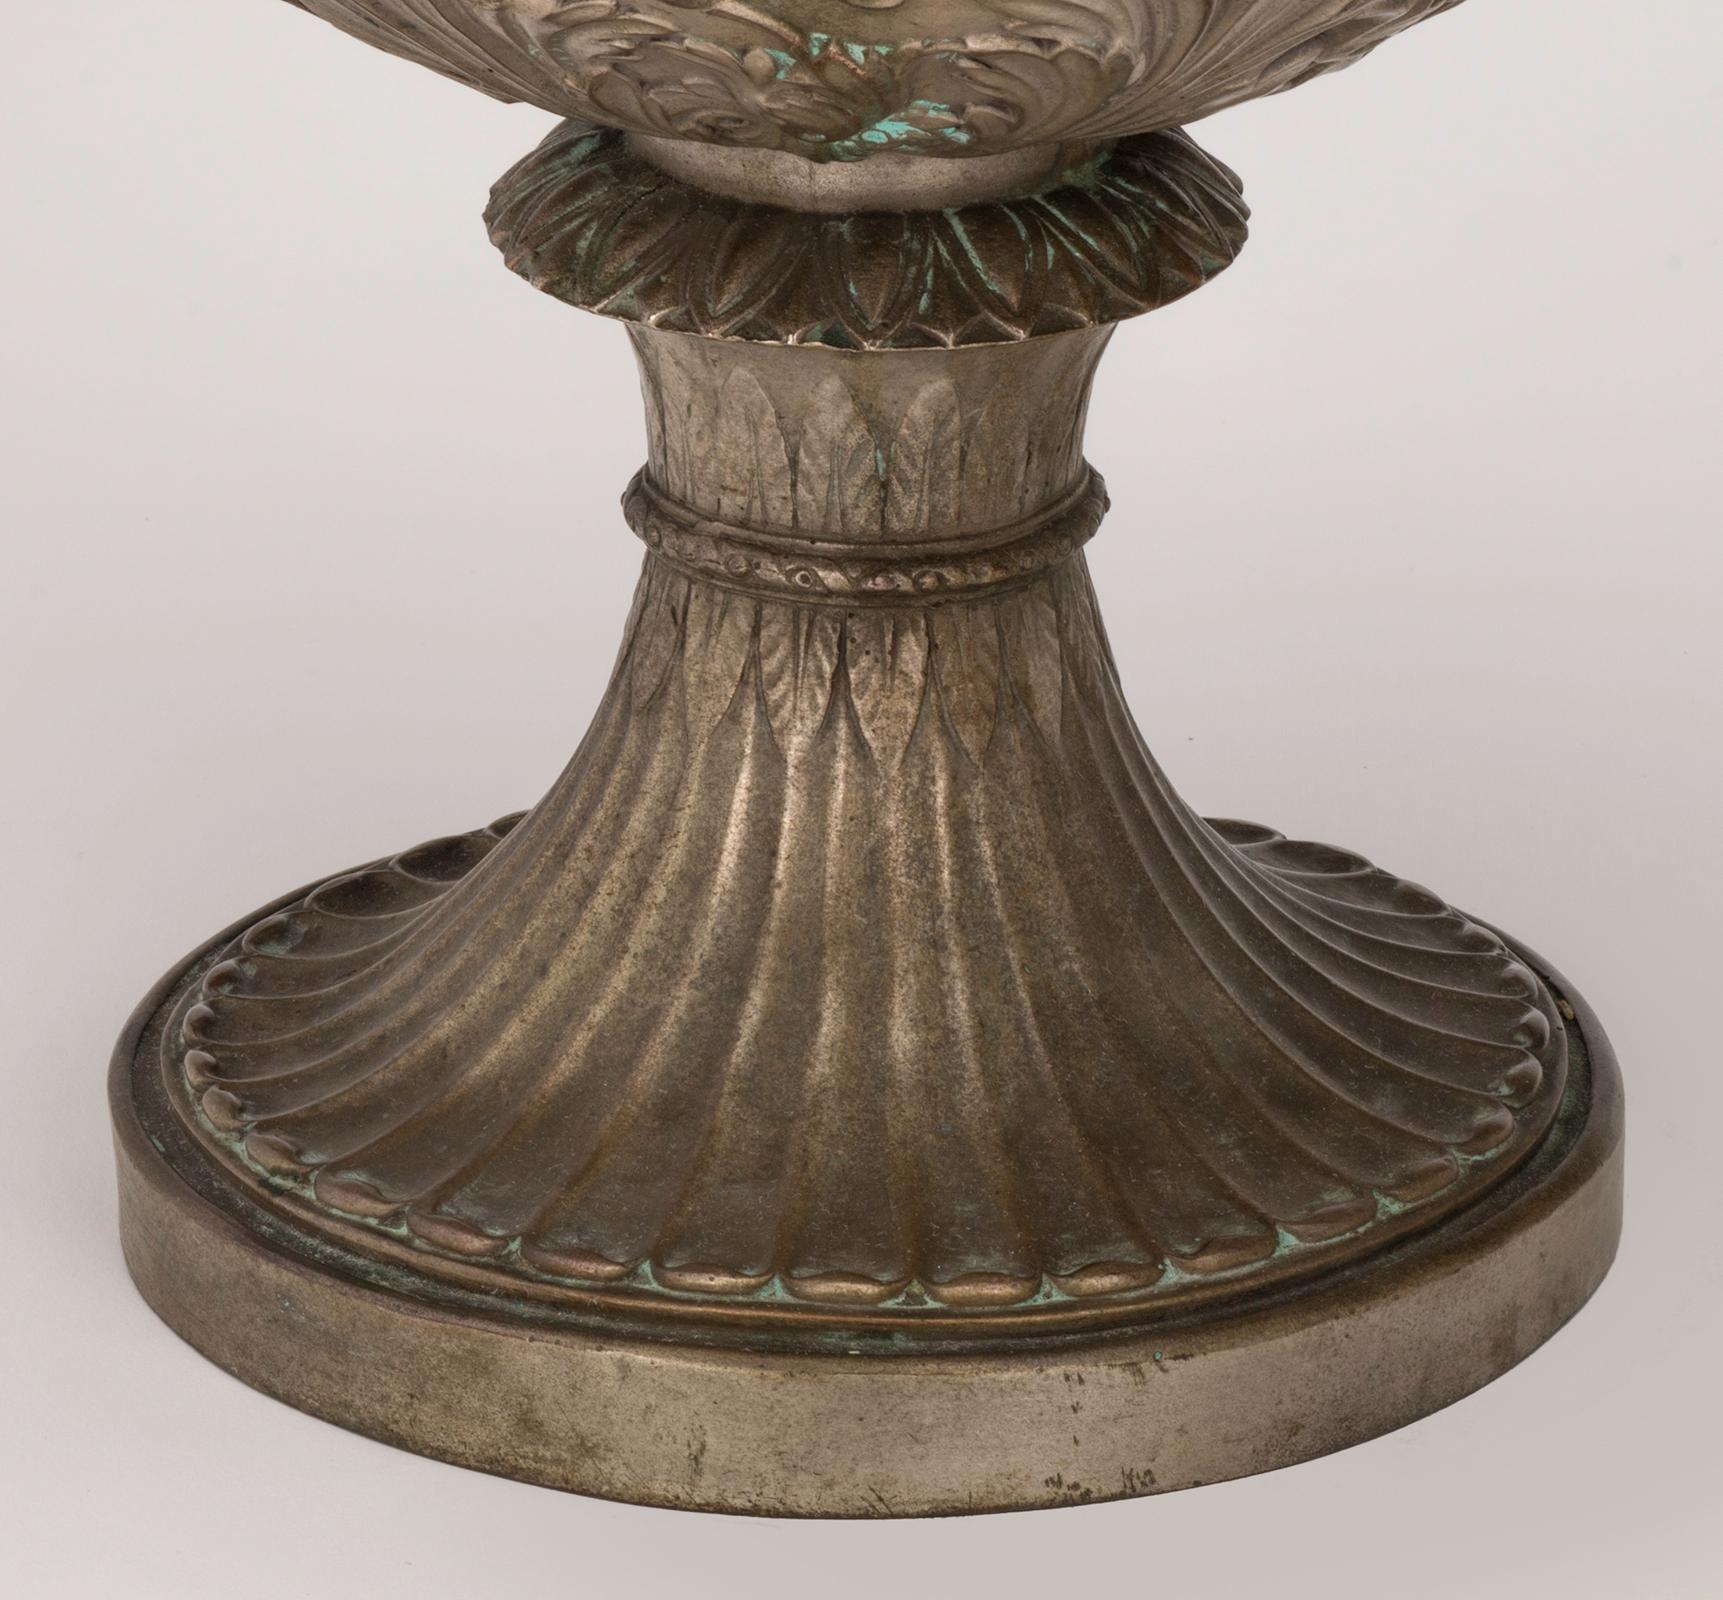 Italian Large Planter Urns, 19th Century Bronze Medici Style, Pair For Sale